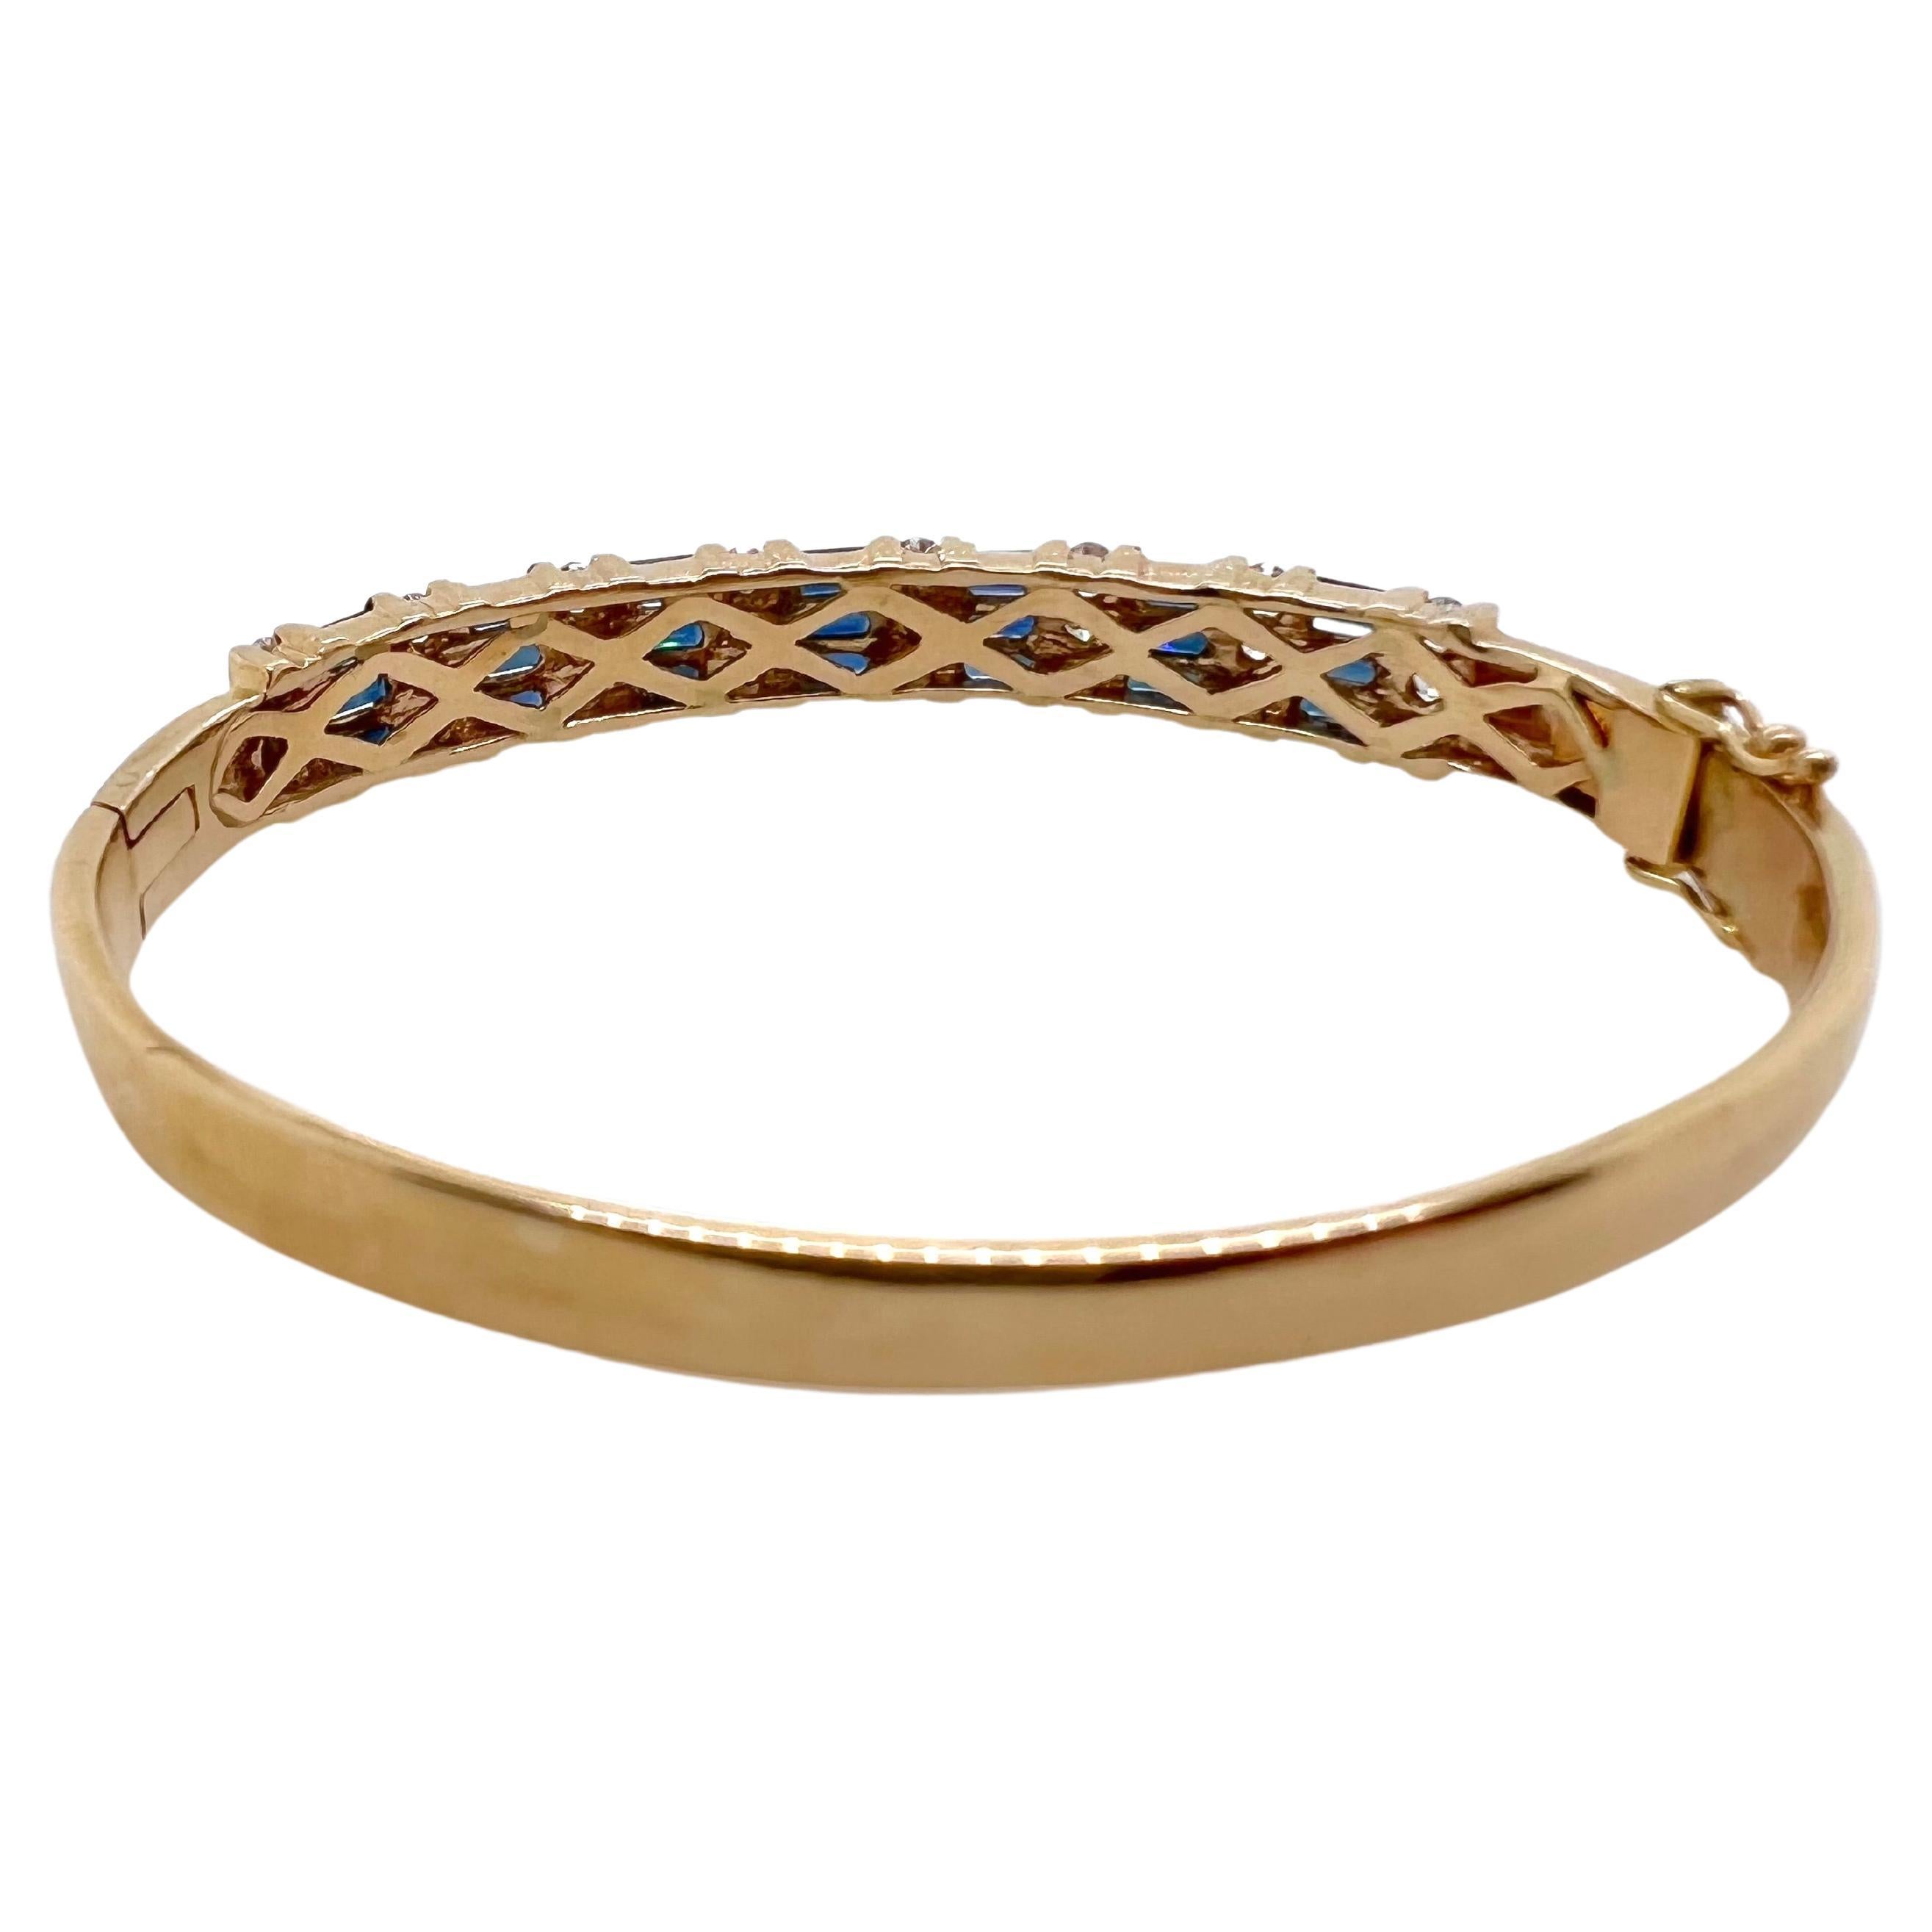 This iconic bangle is made in 14k yellow gold and has sapphire baguettes channeled set along with round diamonds channeled set.  Each section has 3 sapphire baguettes followed by 3 diamonds which makes it symmetrical.  It is perfect for smart casual